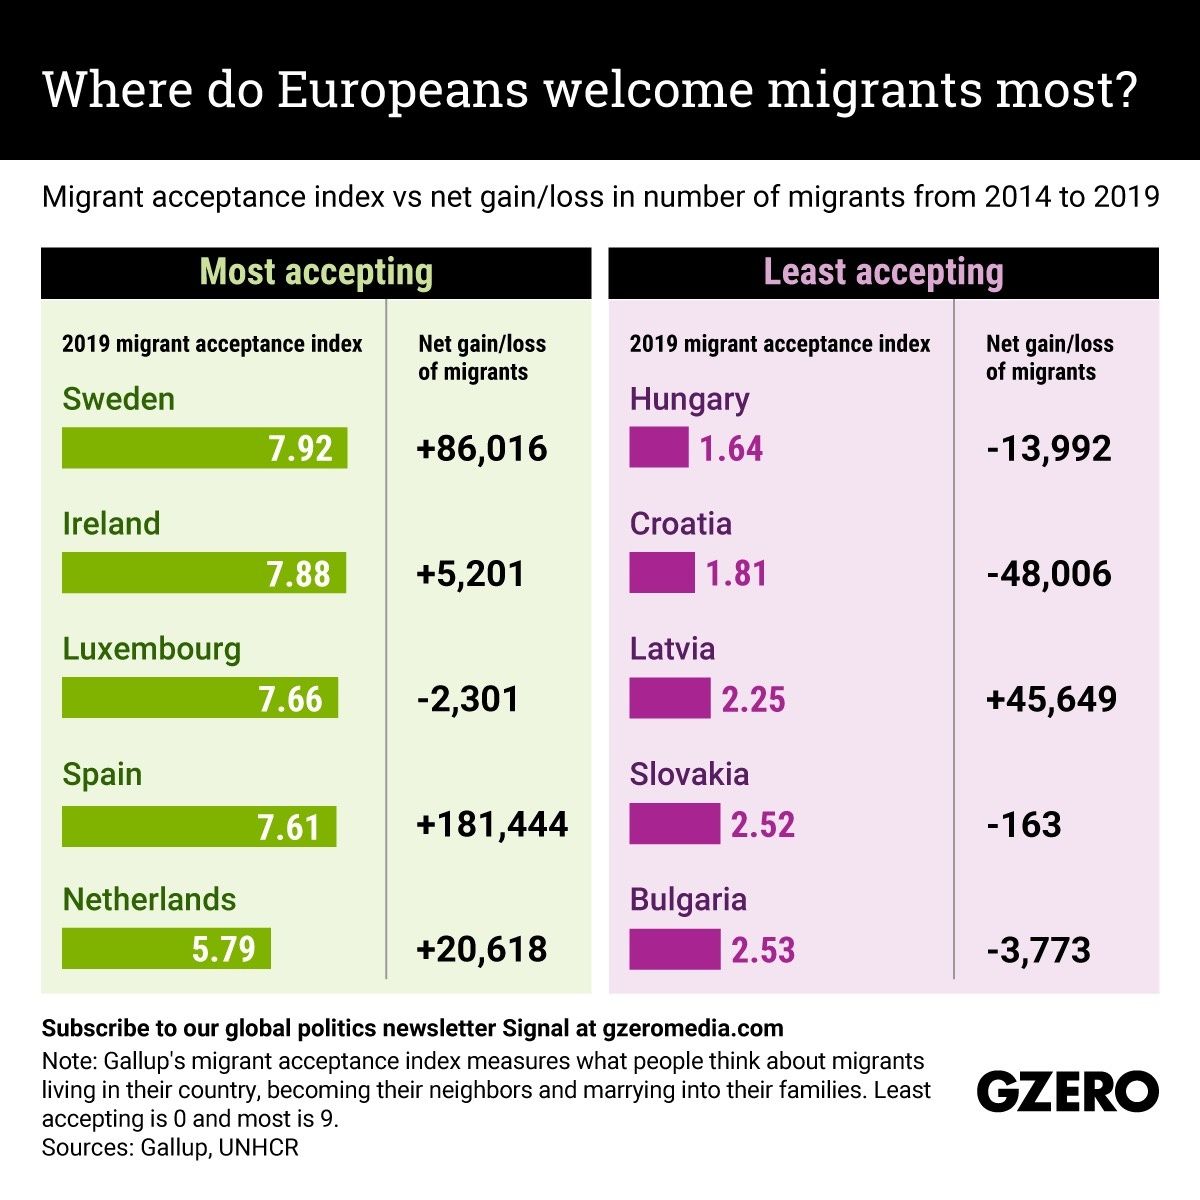 The Graphic Truth: Where do Europeans welcome migrants most?